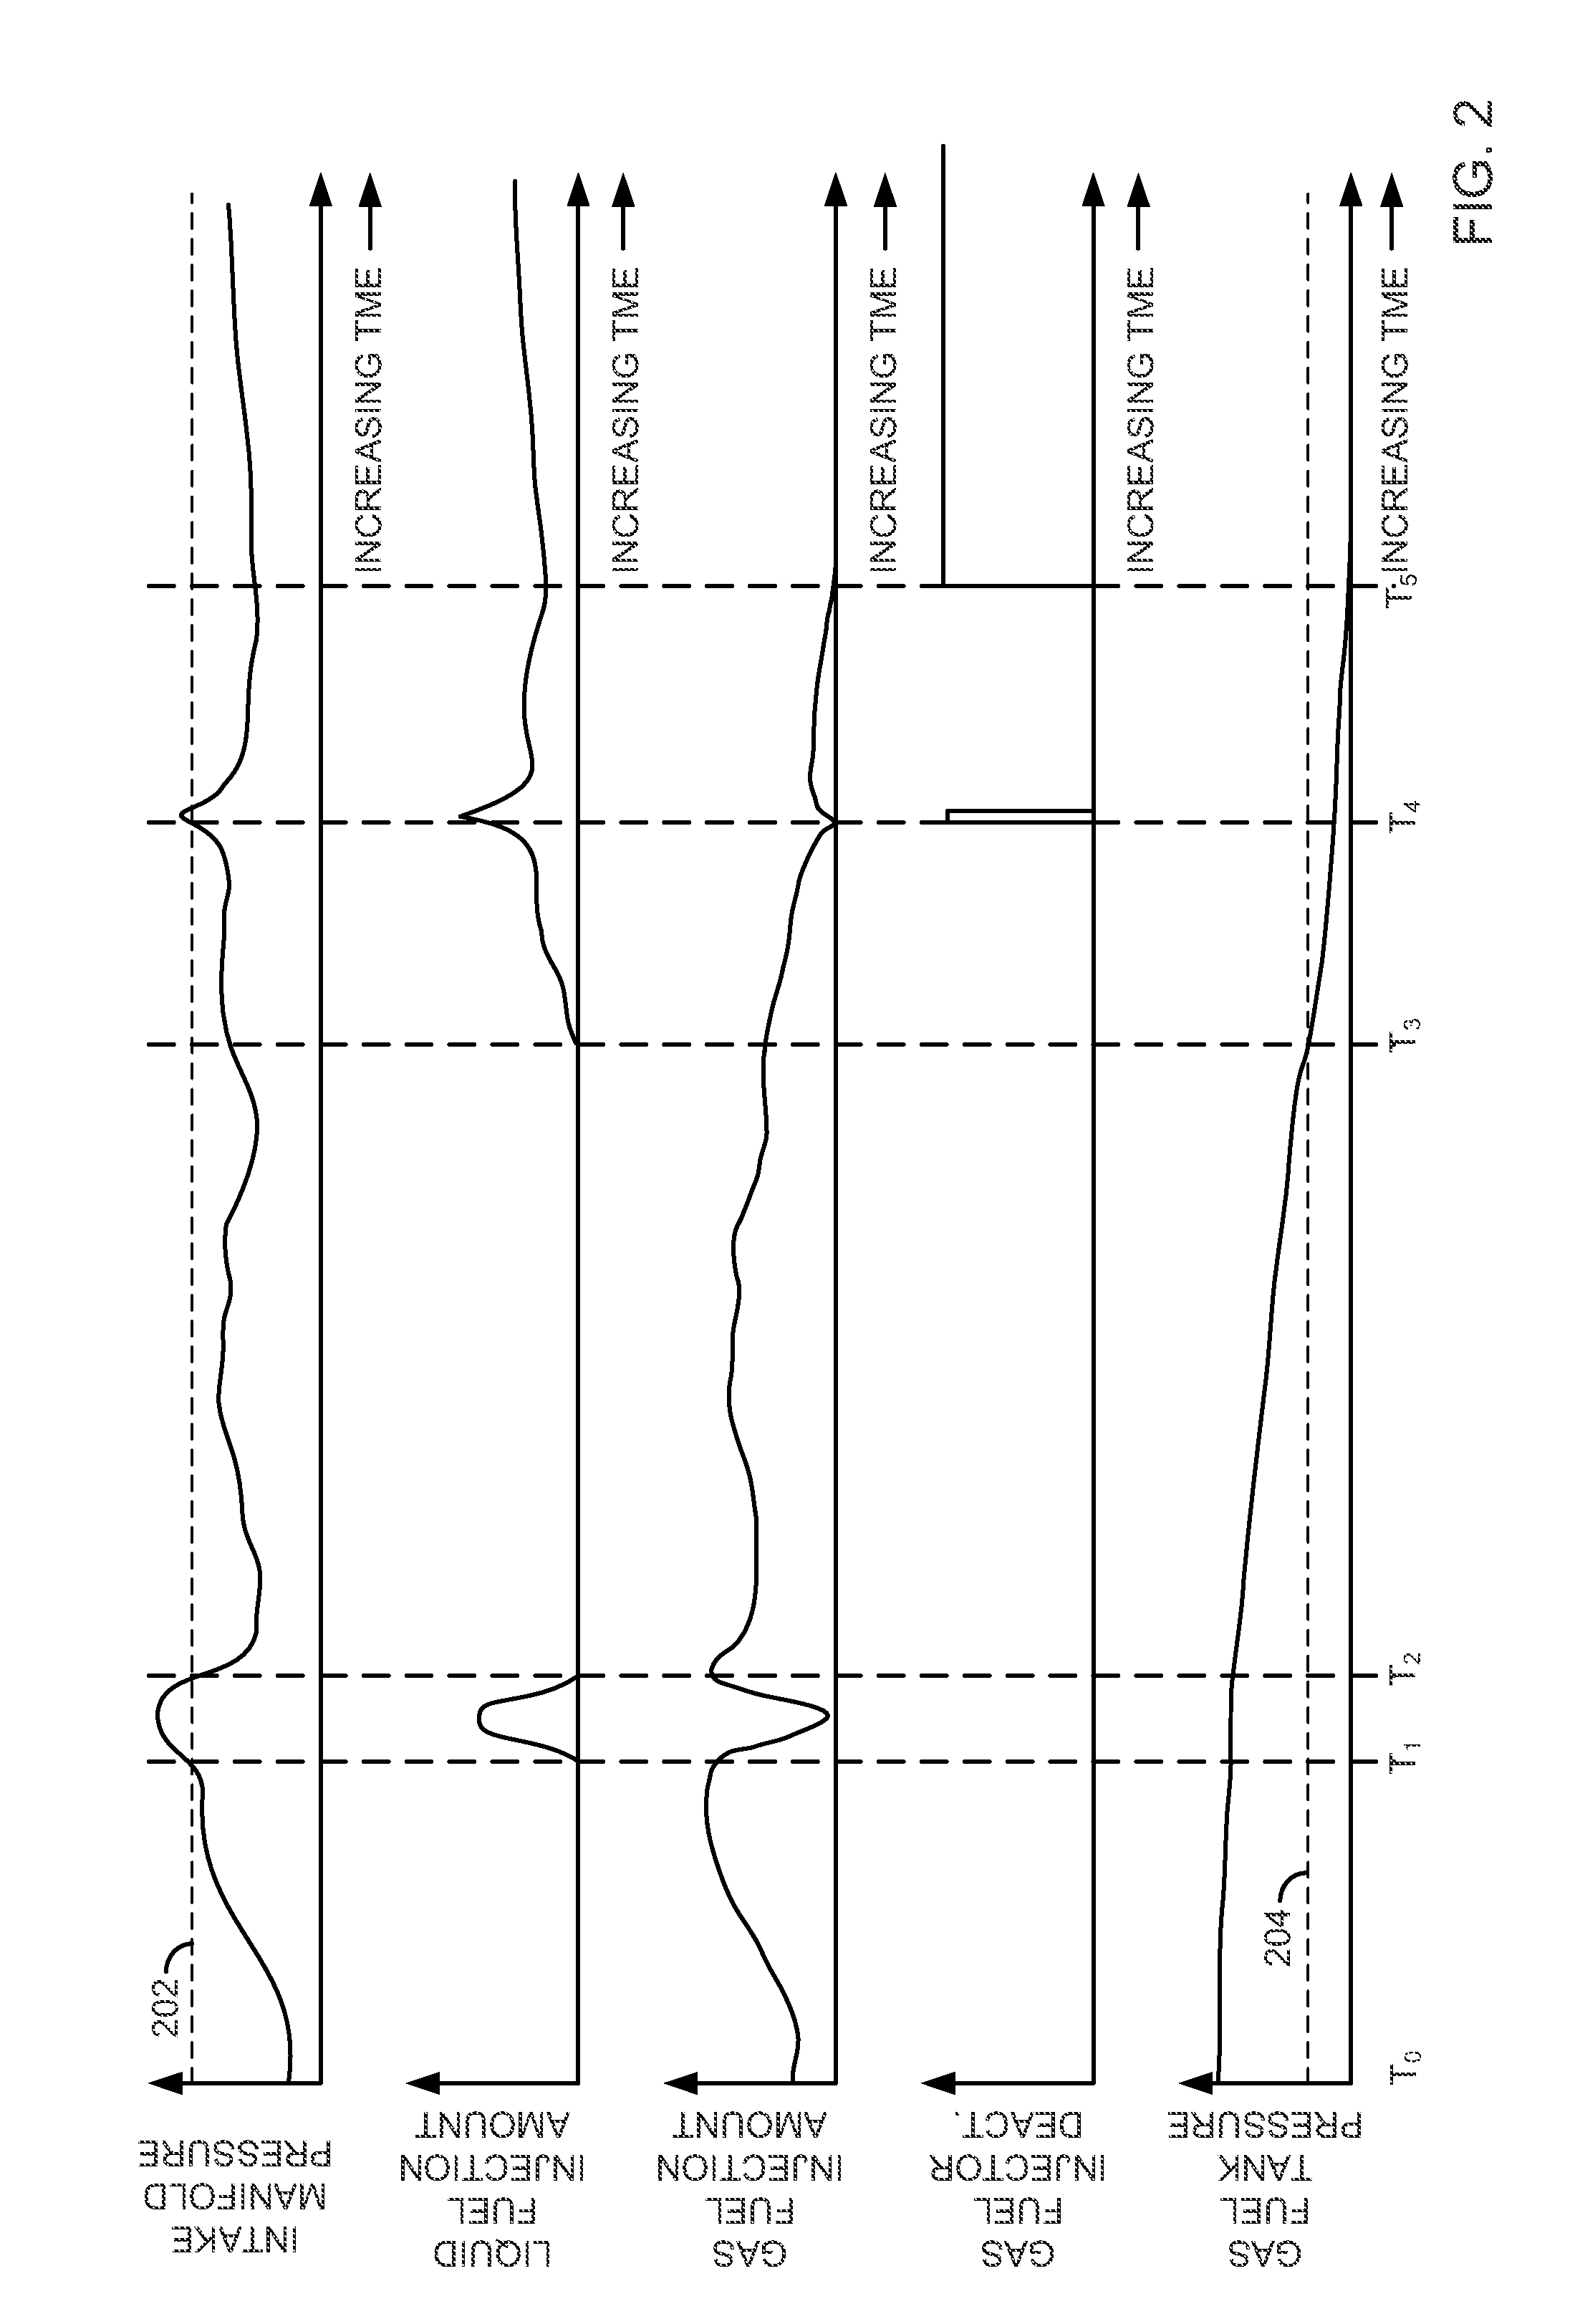 System and method for emptying a tank